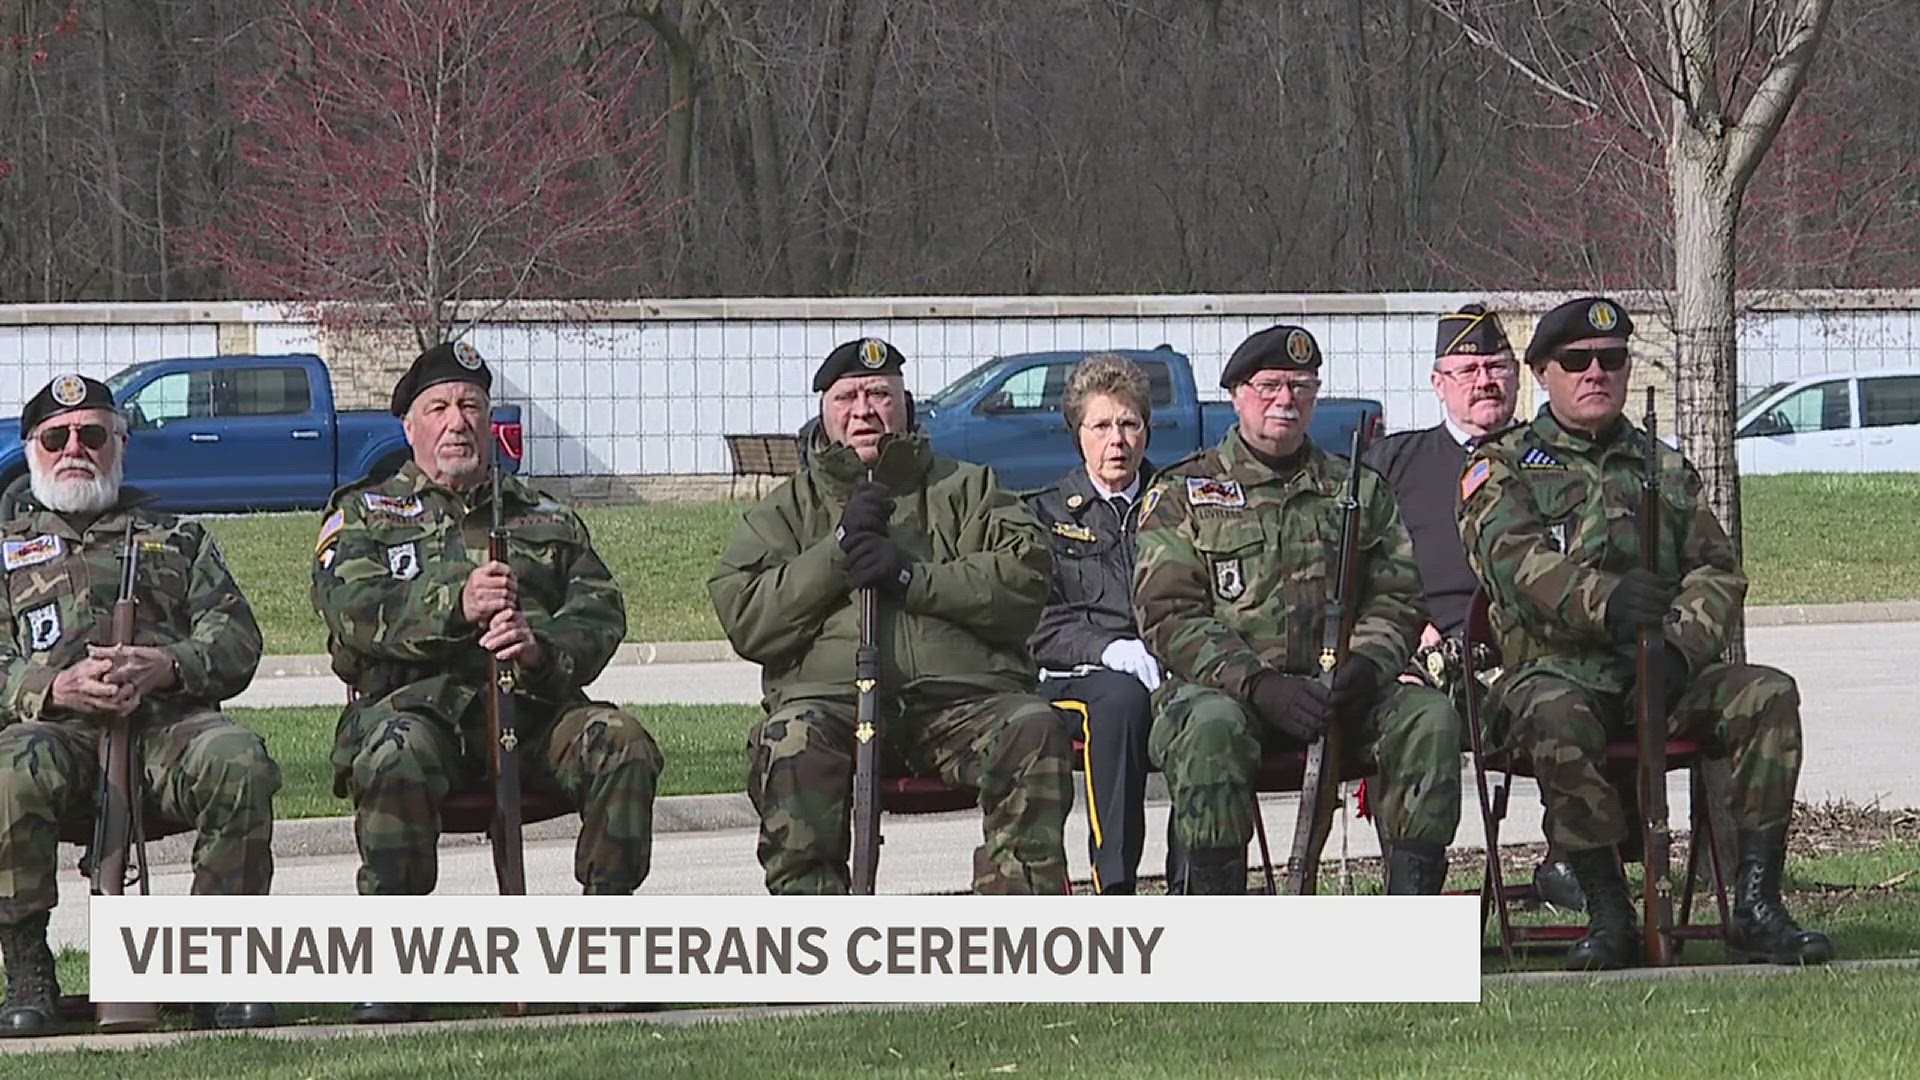 The ceremony comes a day before National Vietnam War Veterans Day, recognized annually on March 29.